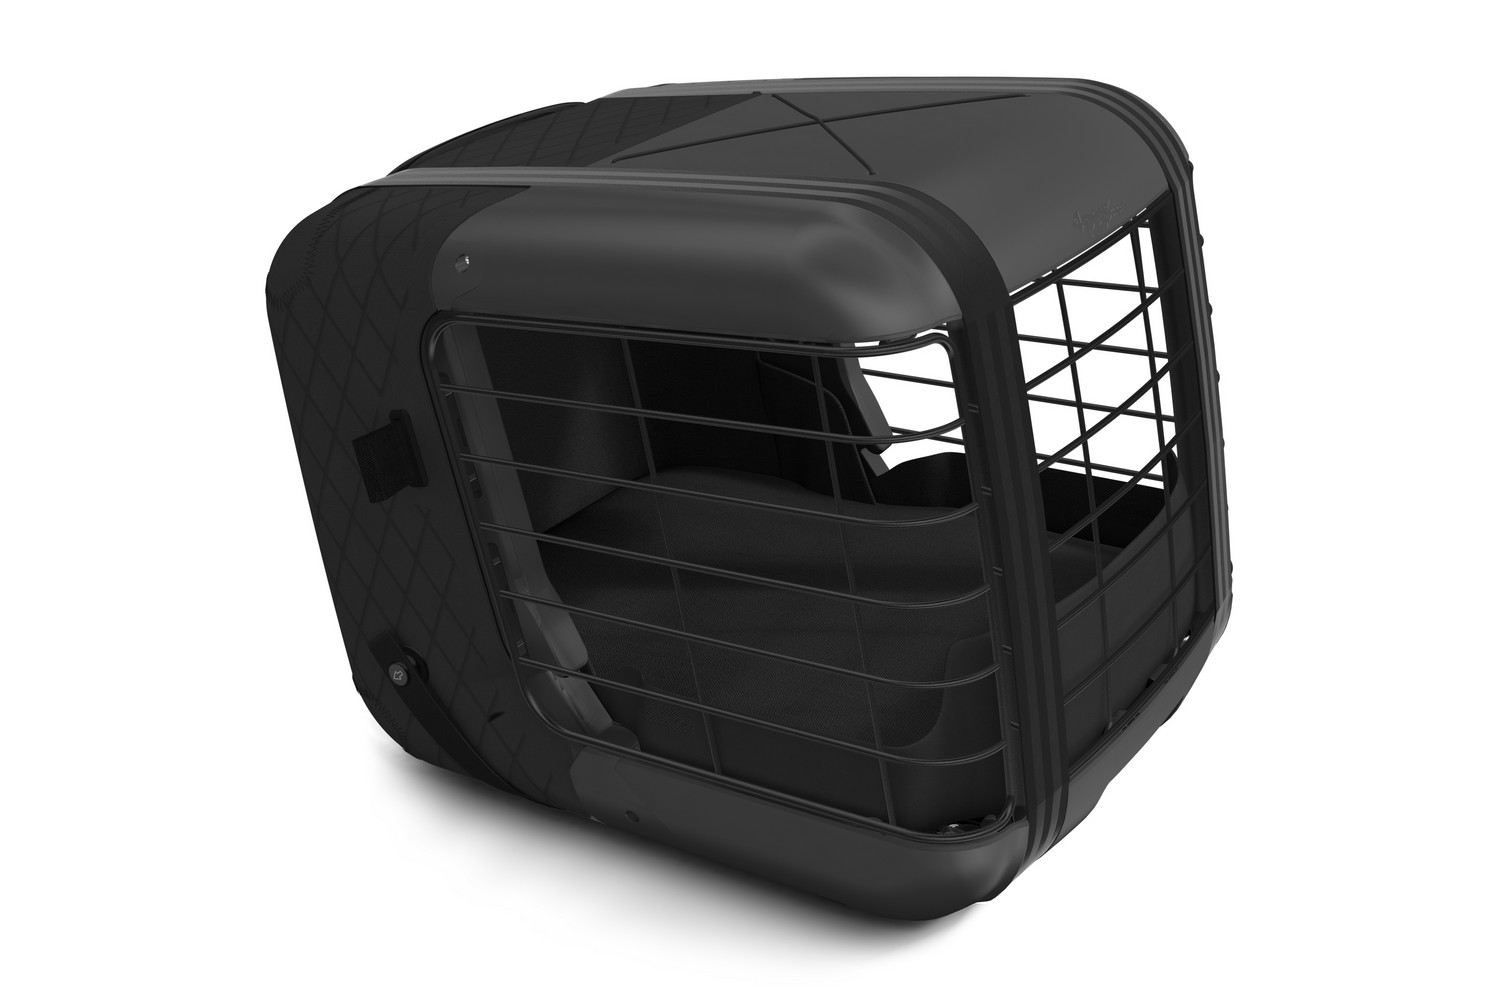 Pet carrier for dog or cat 4pets Caree - Black Series